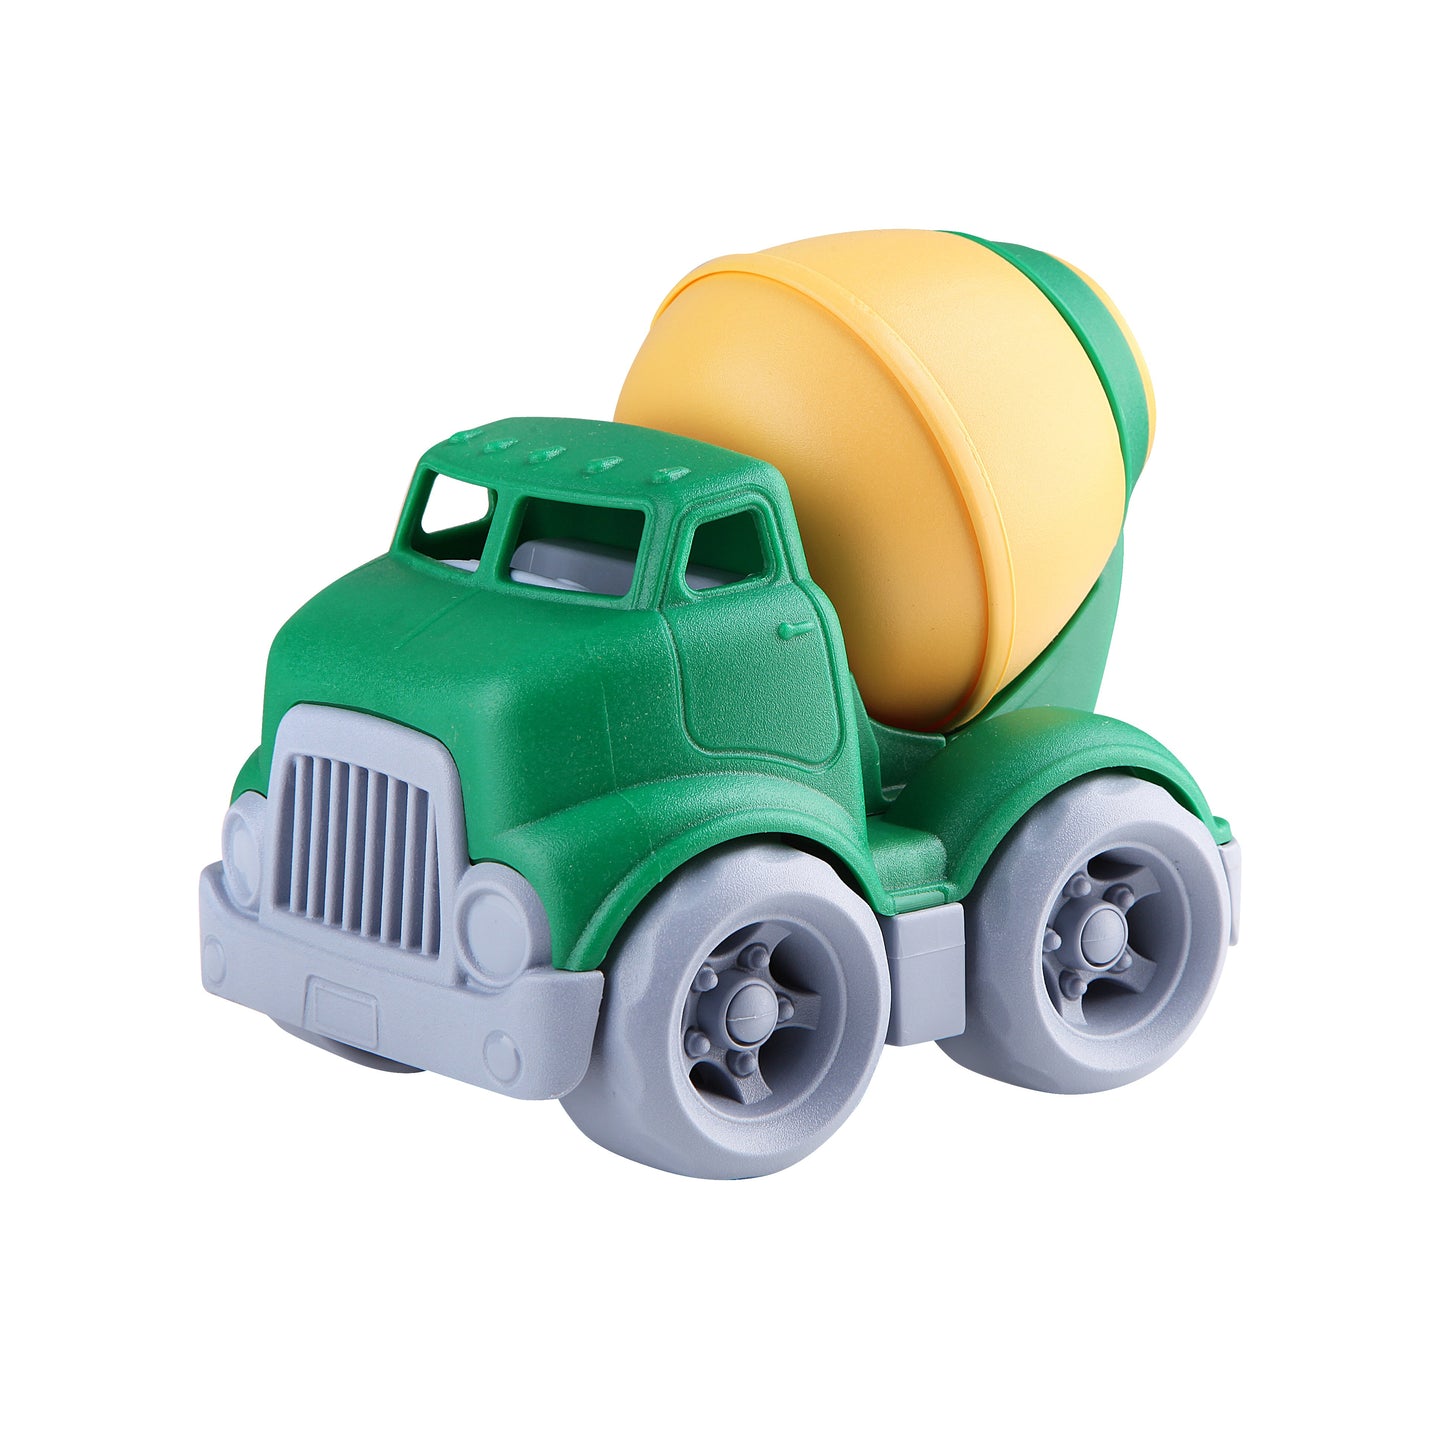 Let's Be Child - Green Mini Mixer Truck